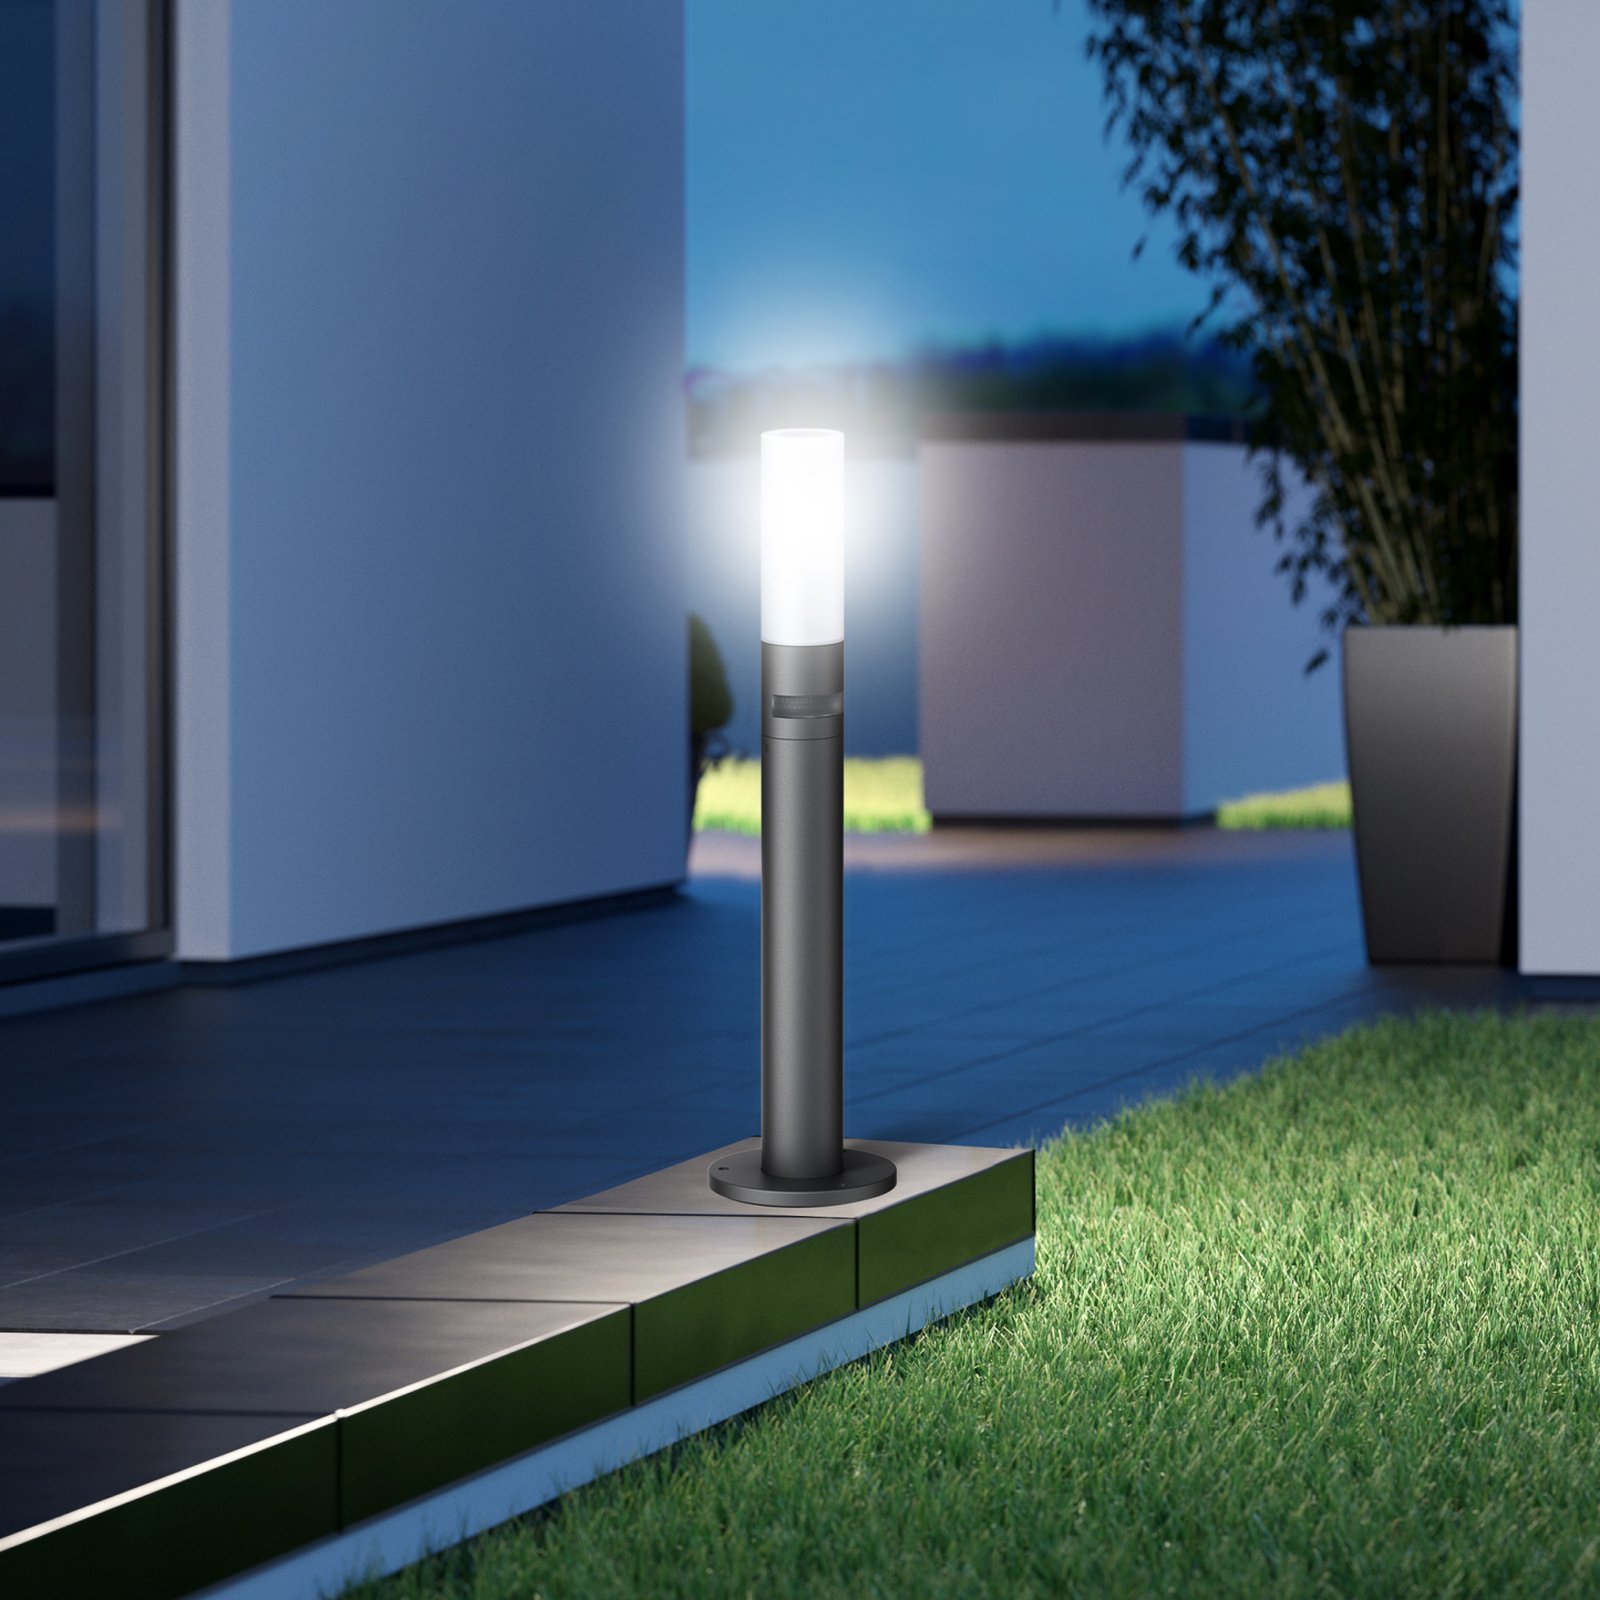 STEINEL GL 65 S LED path lamp with a motion sensor